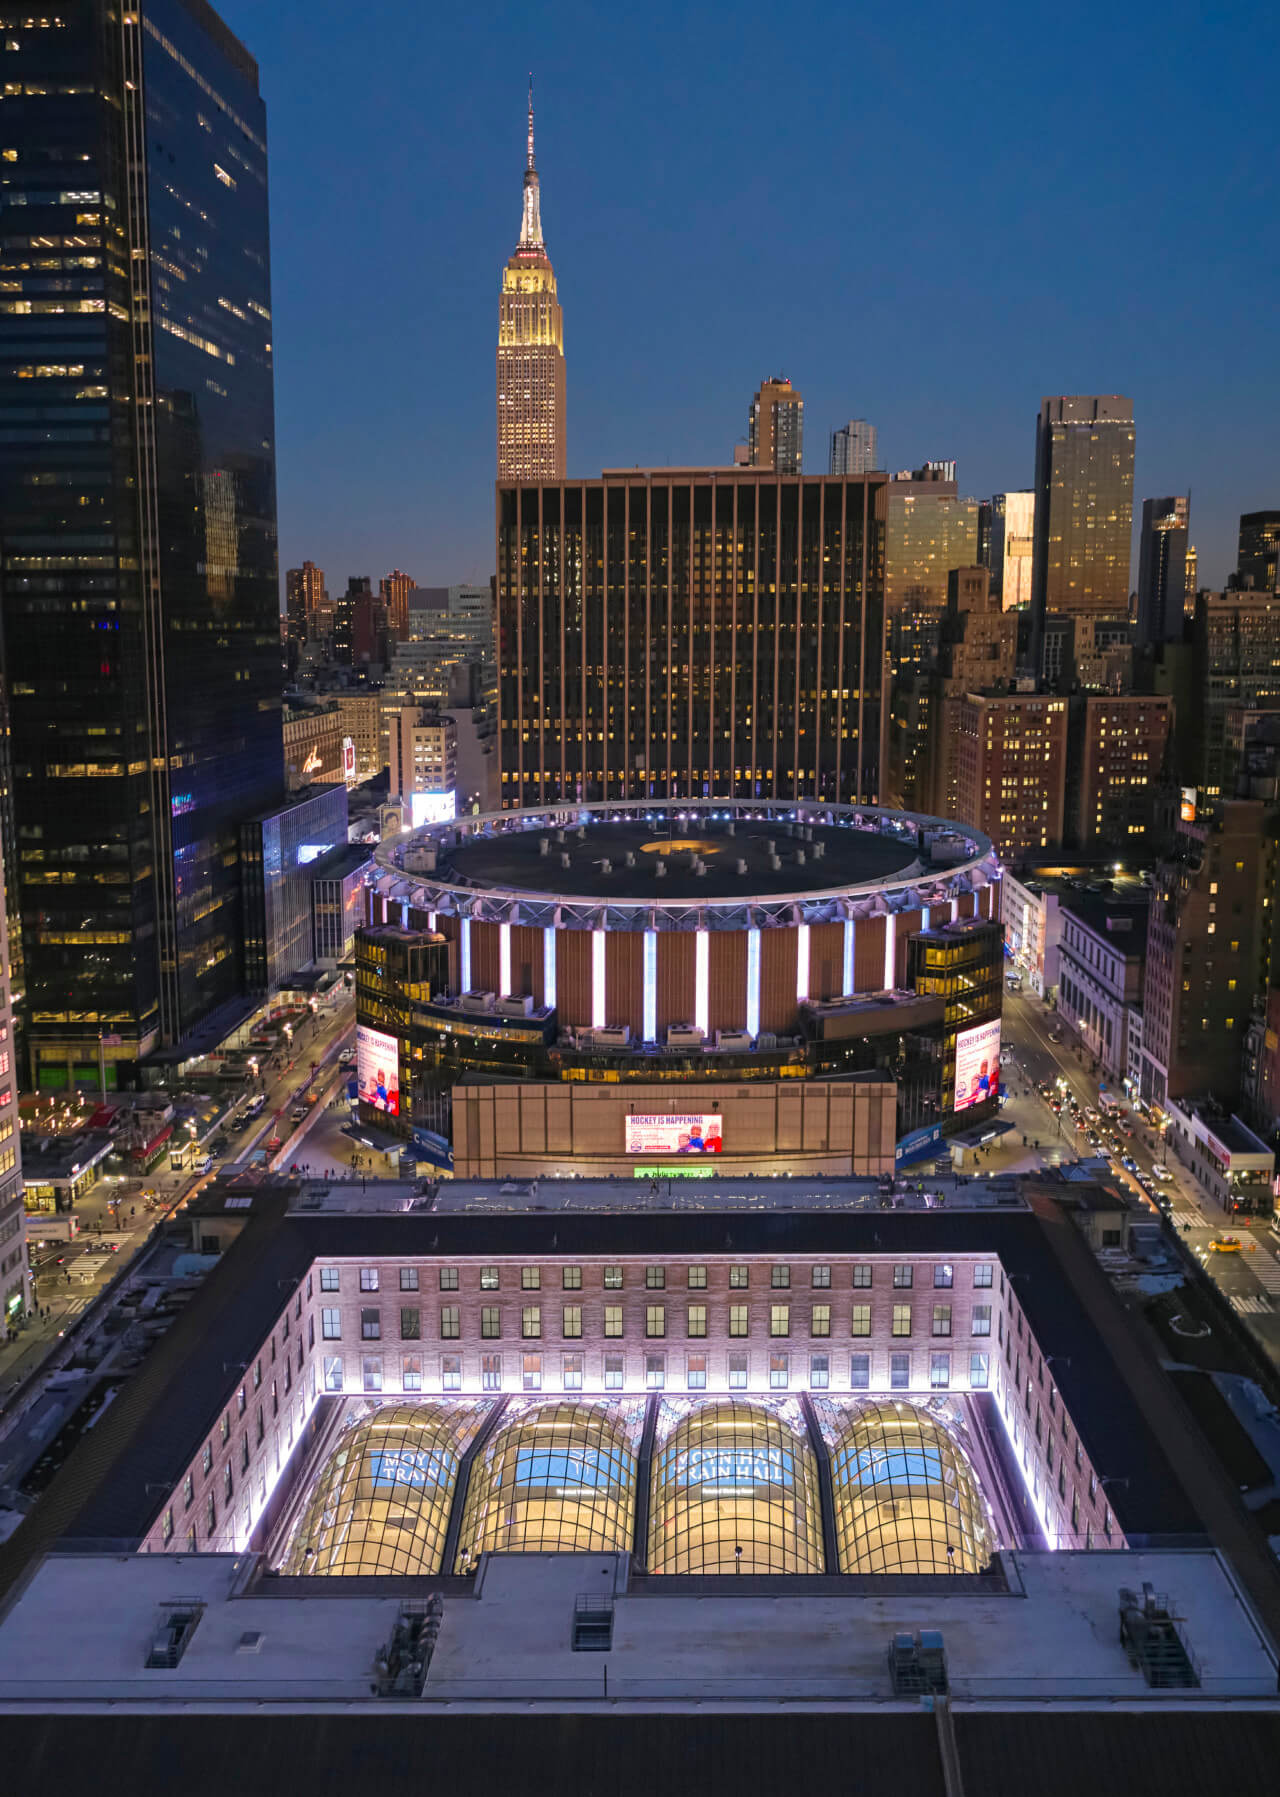 Drone image of maddison square garden and the new glass-topped train hall